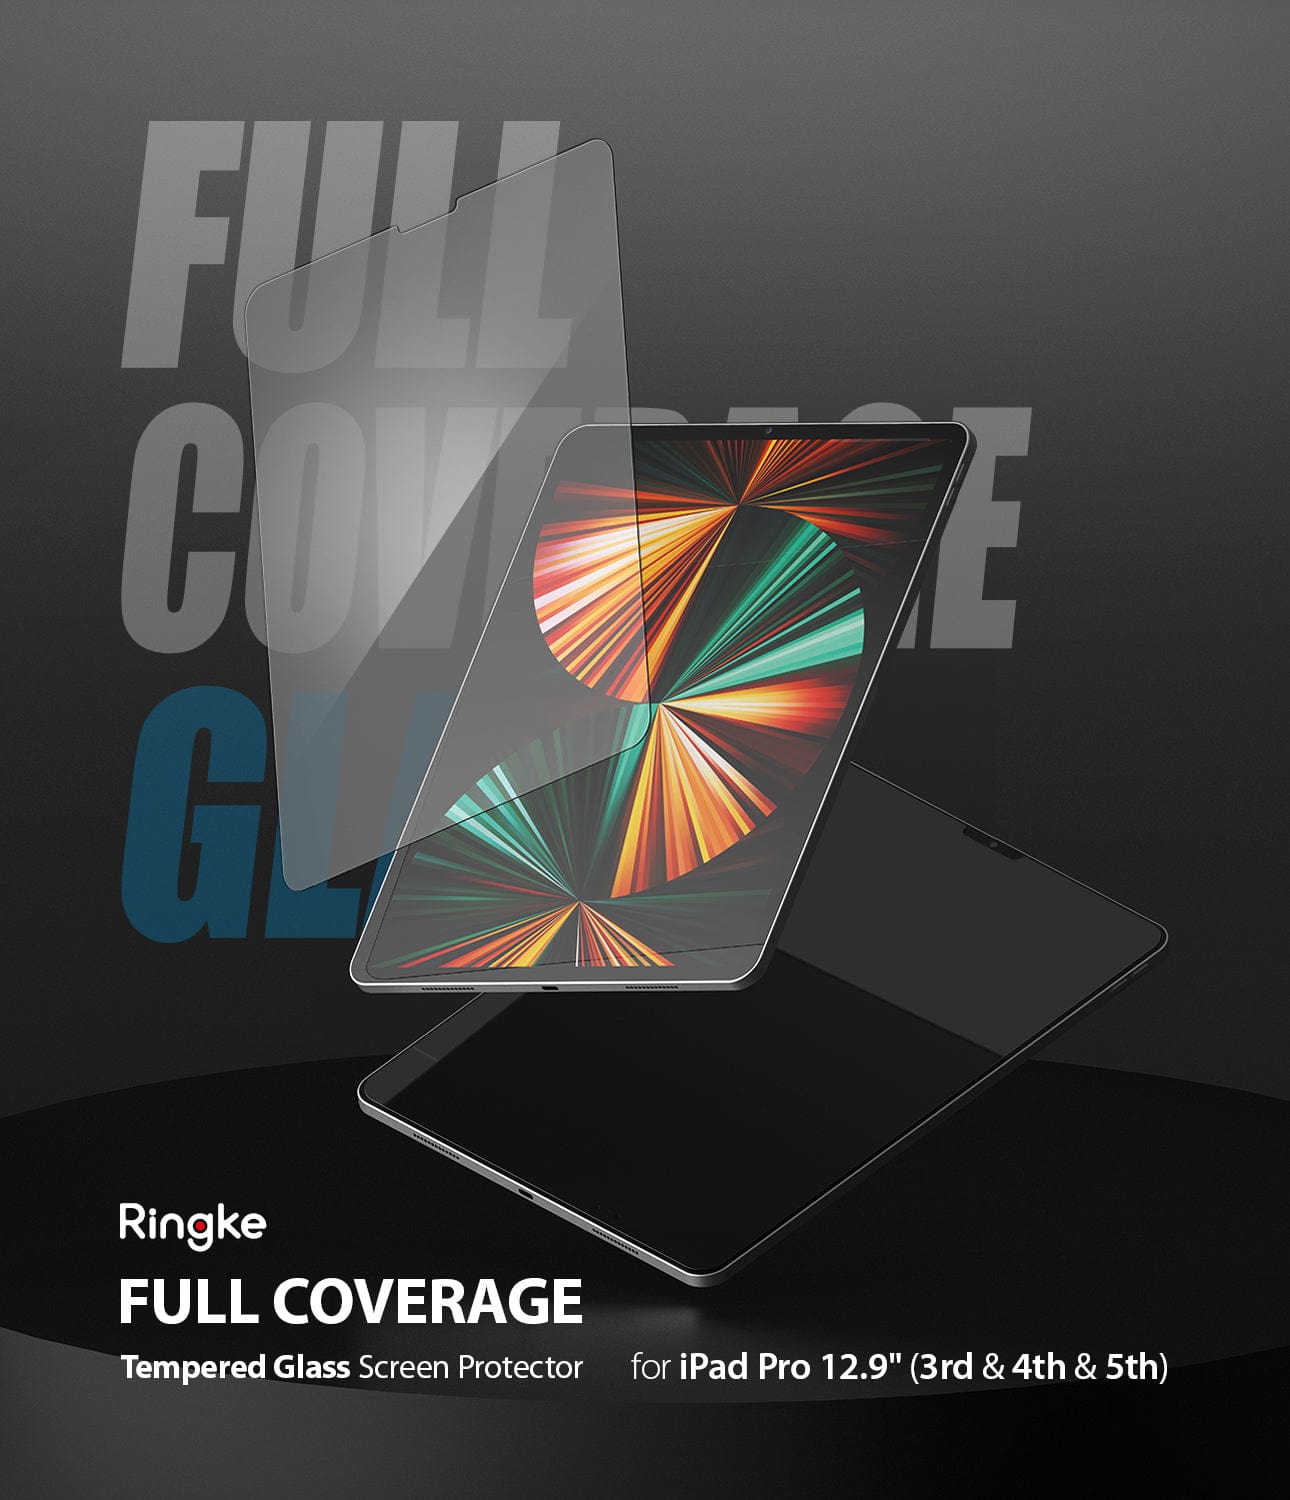 Ringke Full Coverage Tempered Glass Screen Protector for 12.9" 